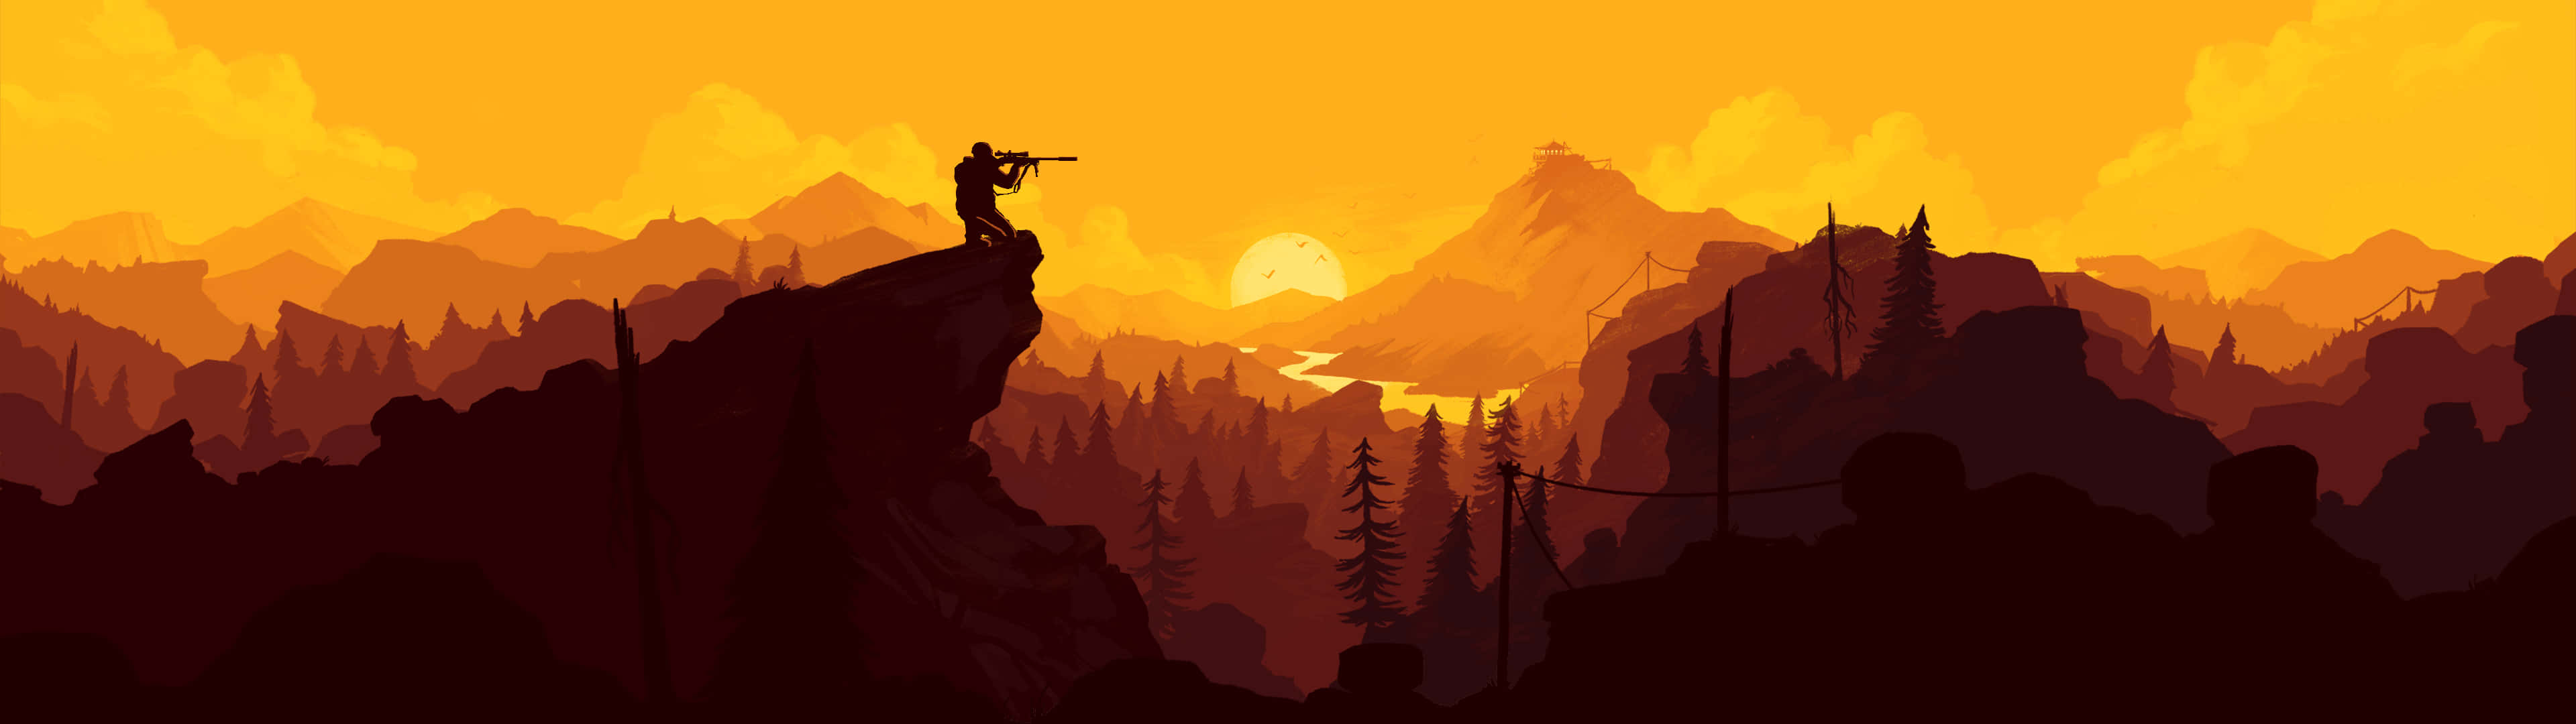 A Man Standing On Top Of A Mountain With A Sunset Behind Him Wallpaper